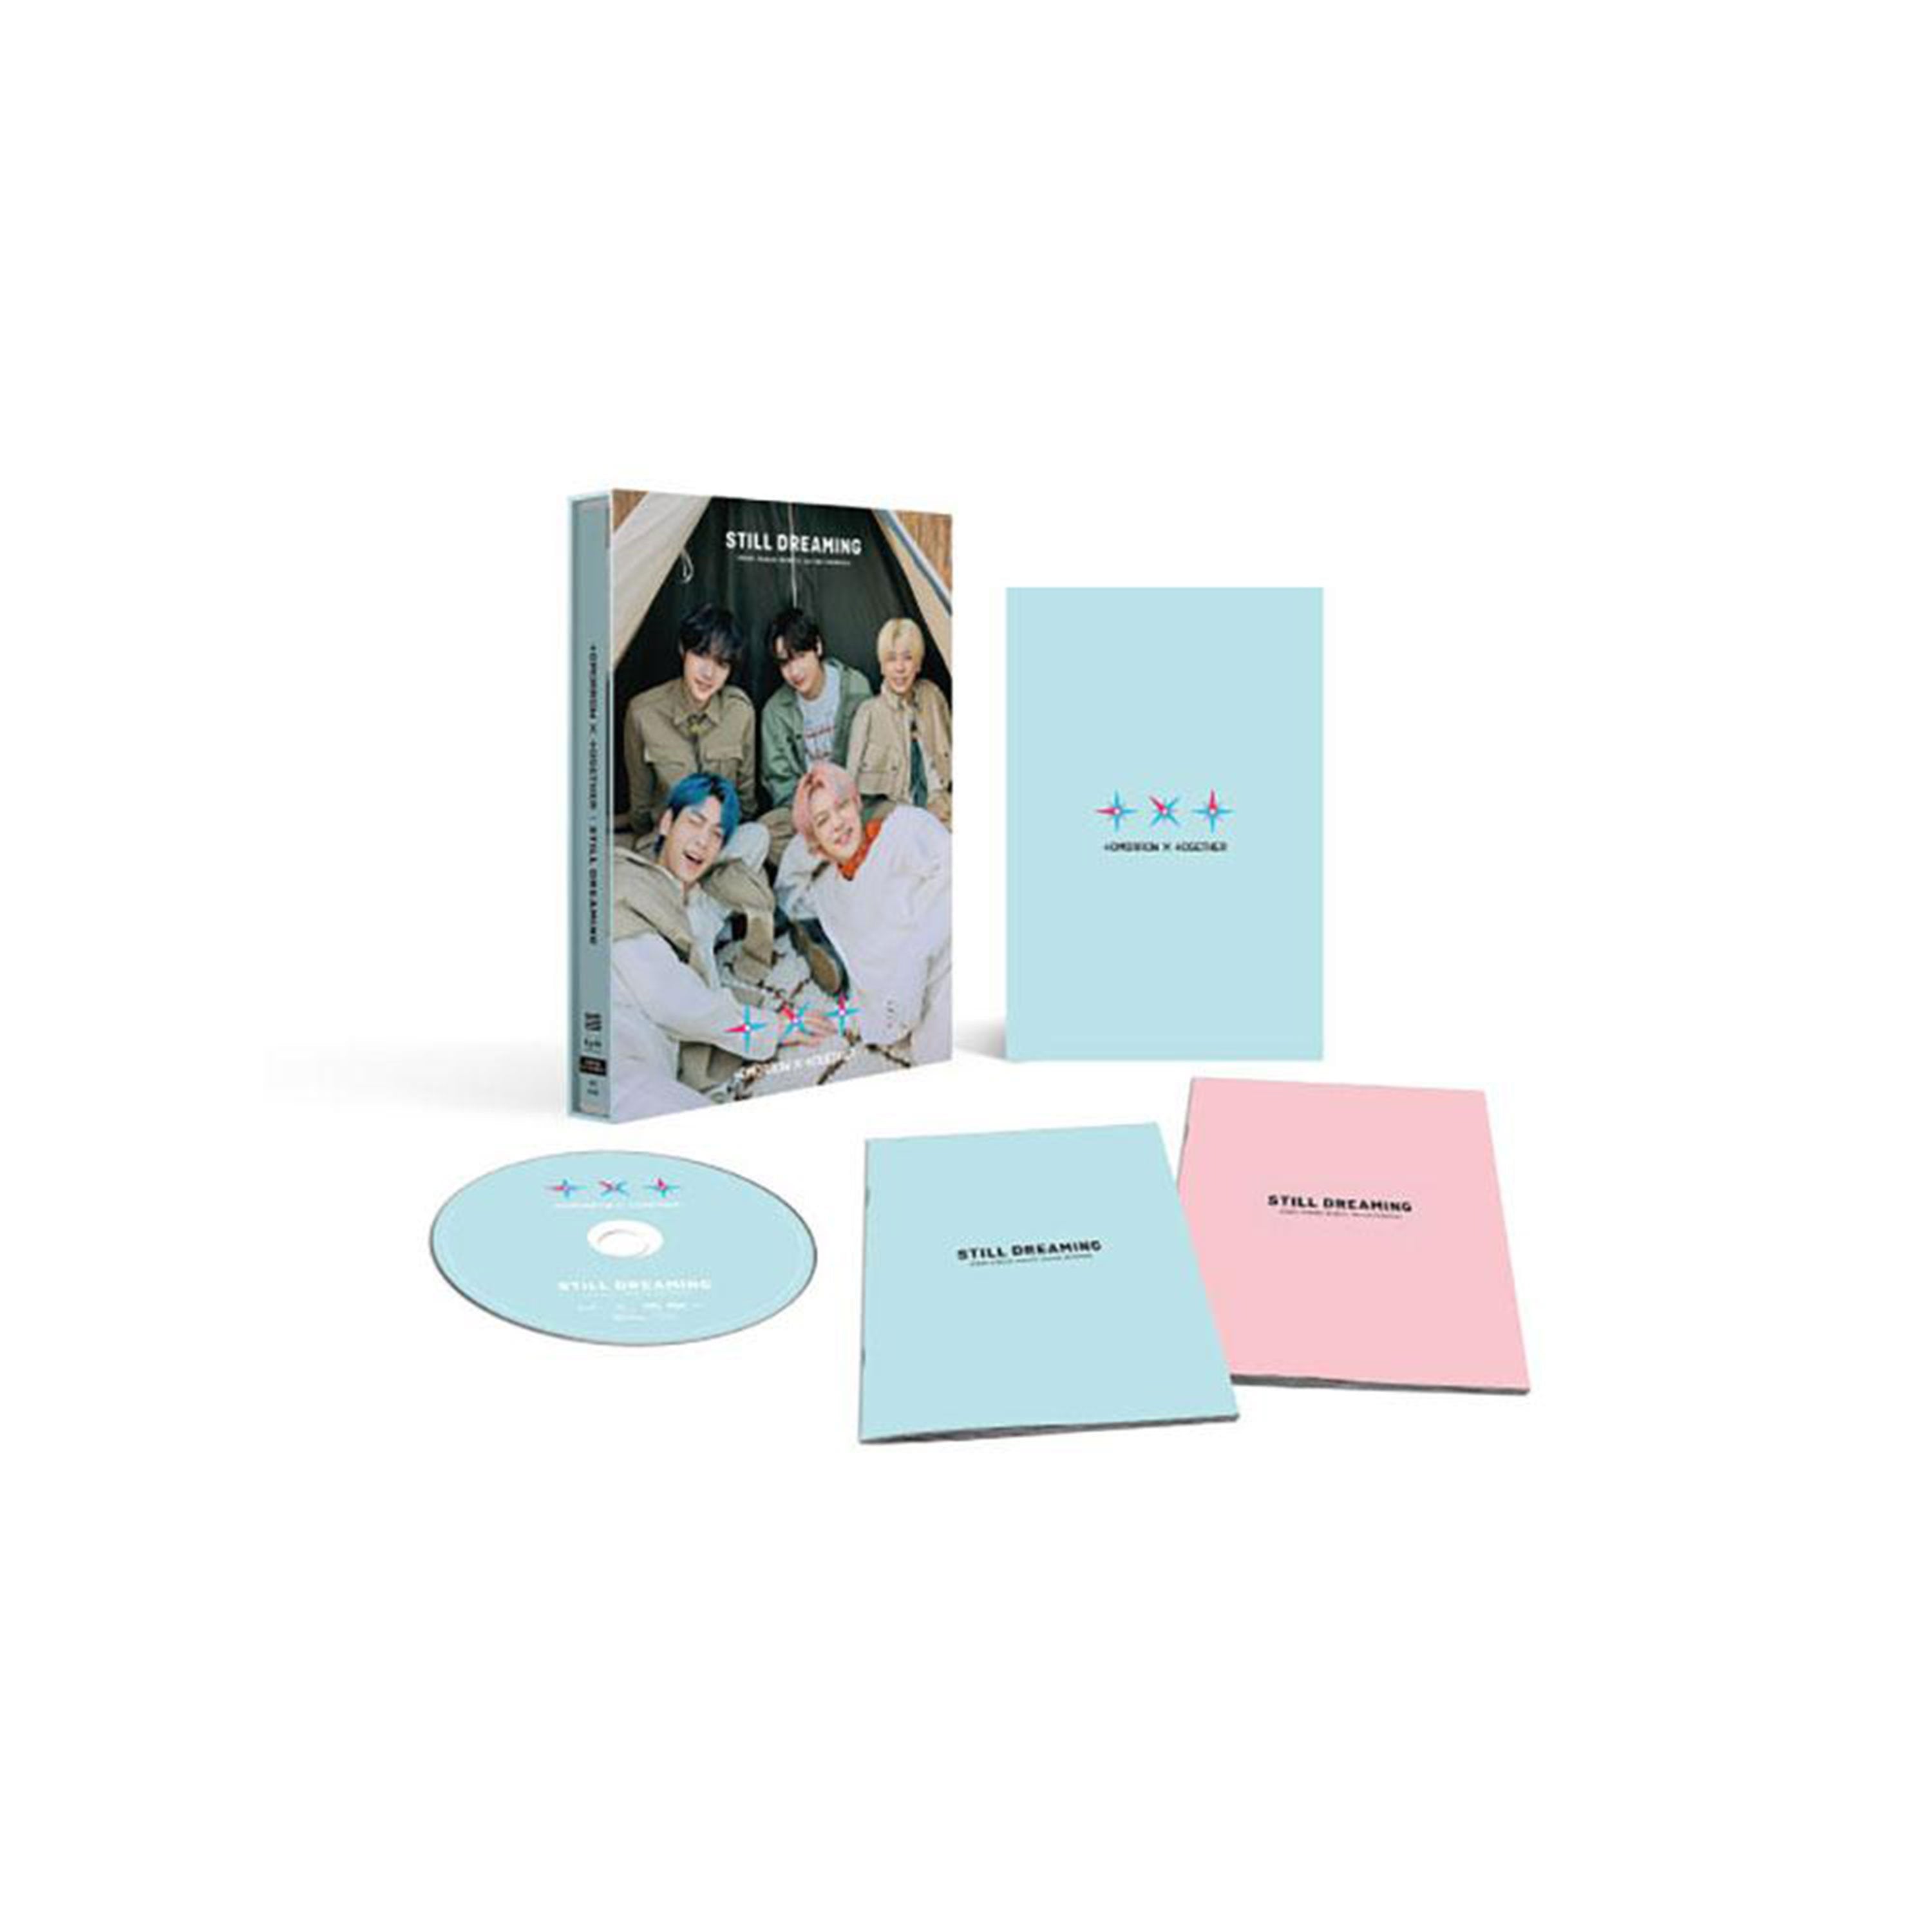 Still Dreaming (Limited Edition A) CD+Book - TXT Official Store